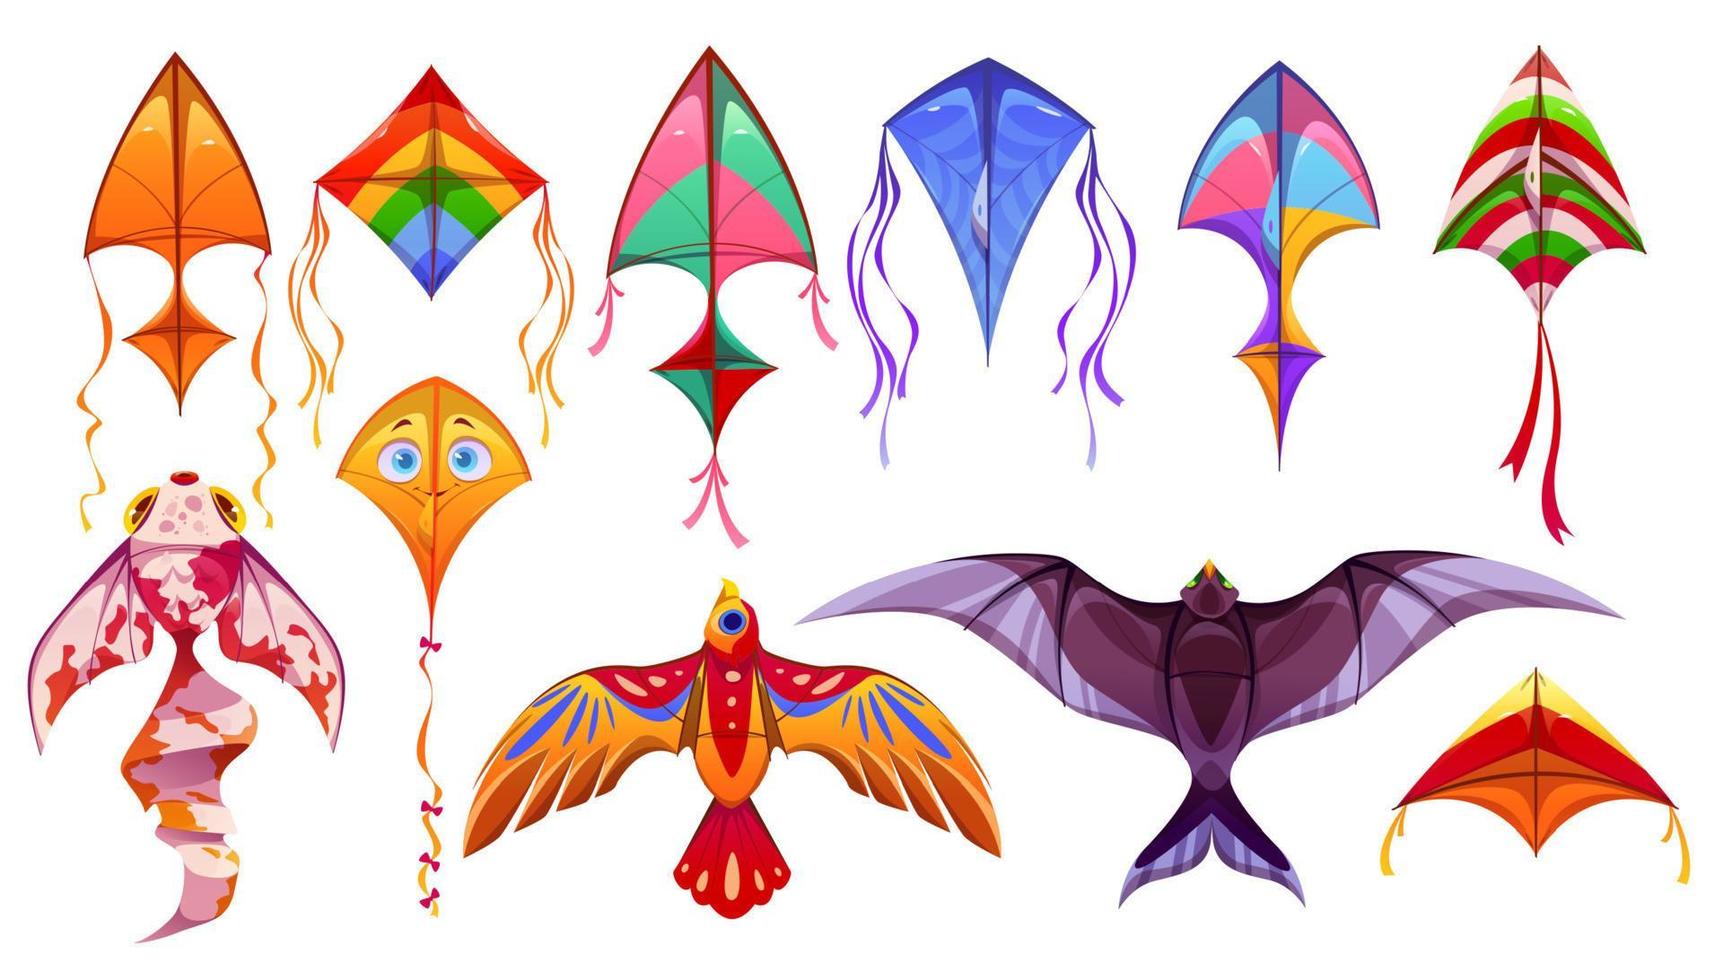 Cartoon set of colorful kites isolated on white vector